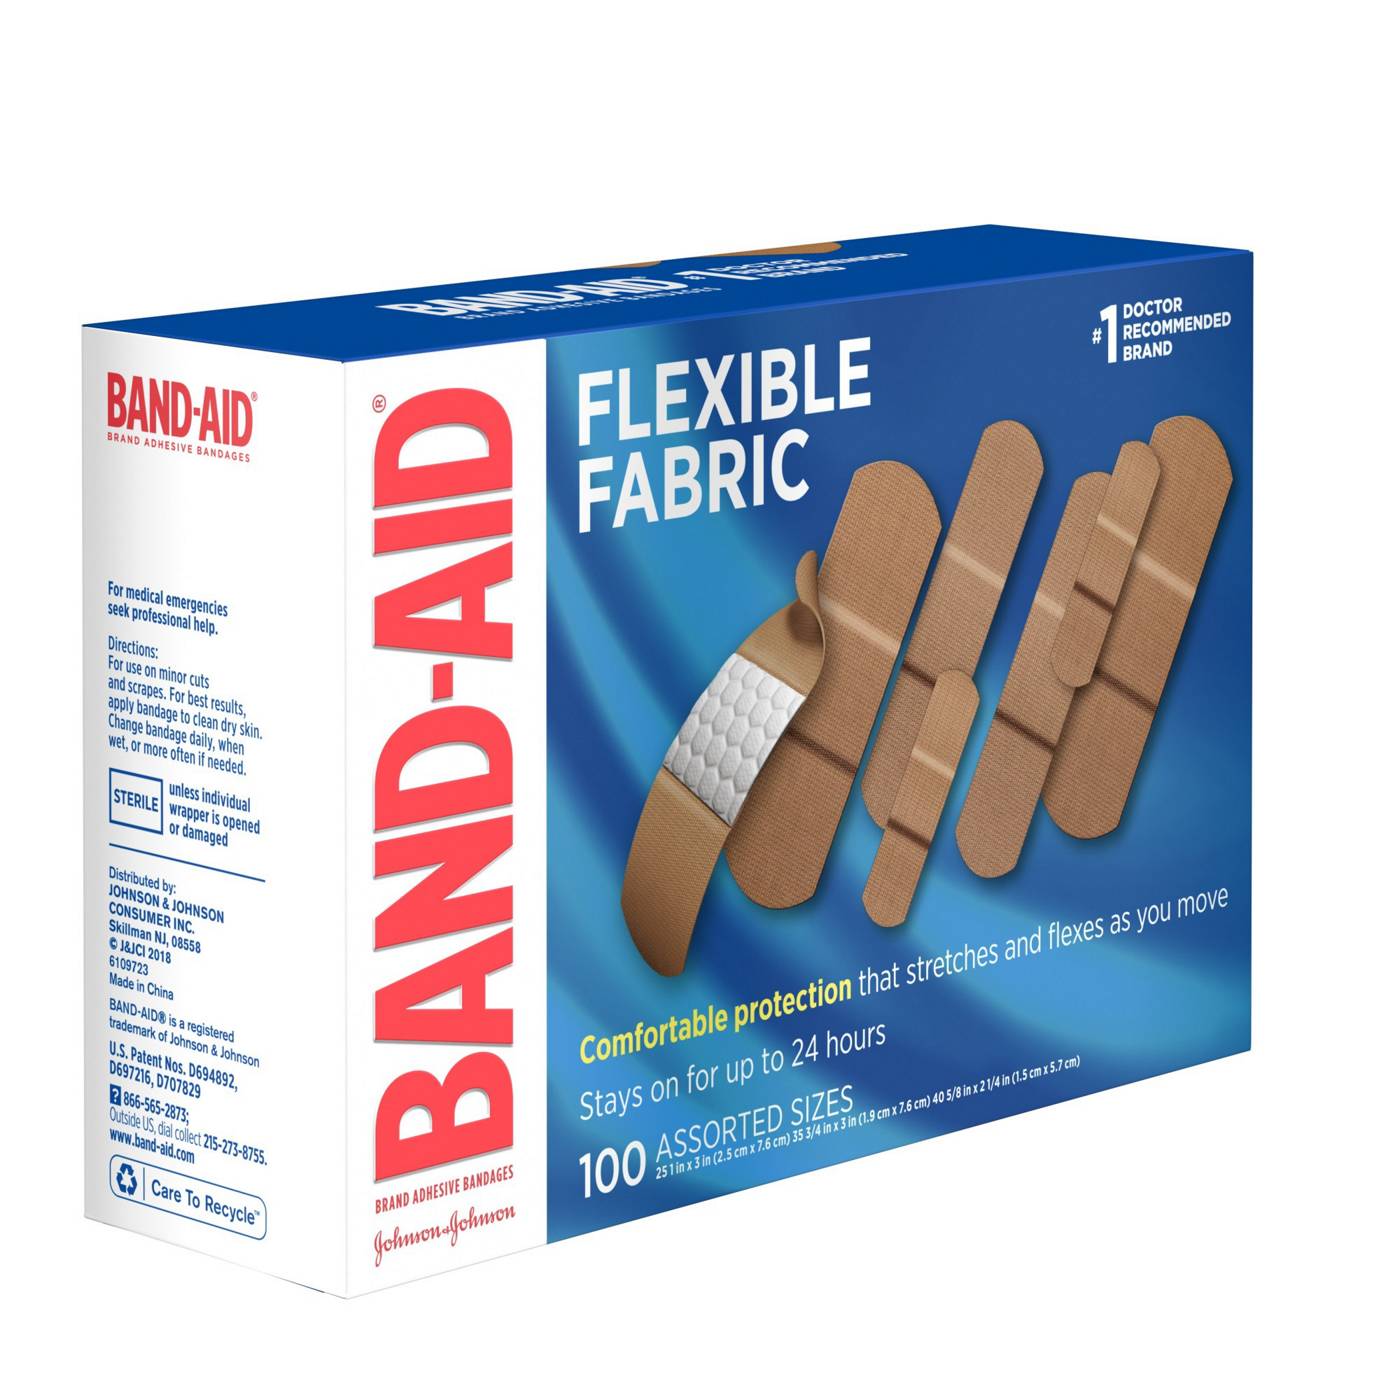 Band-Aid Brand Flexible Fabric Adhesive Bandages For Comfortable